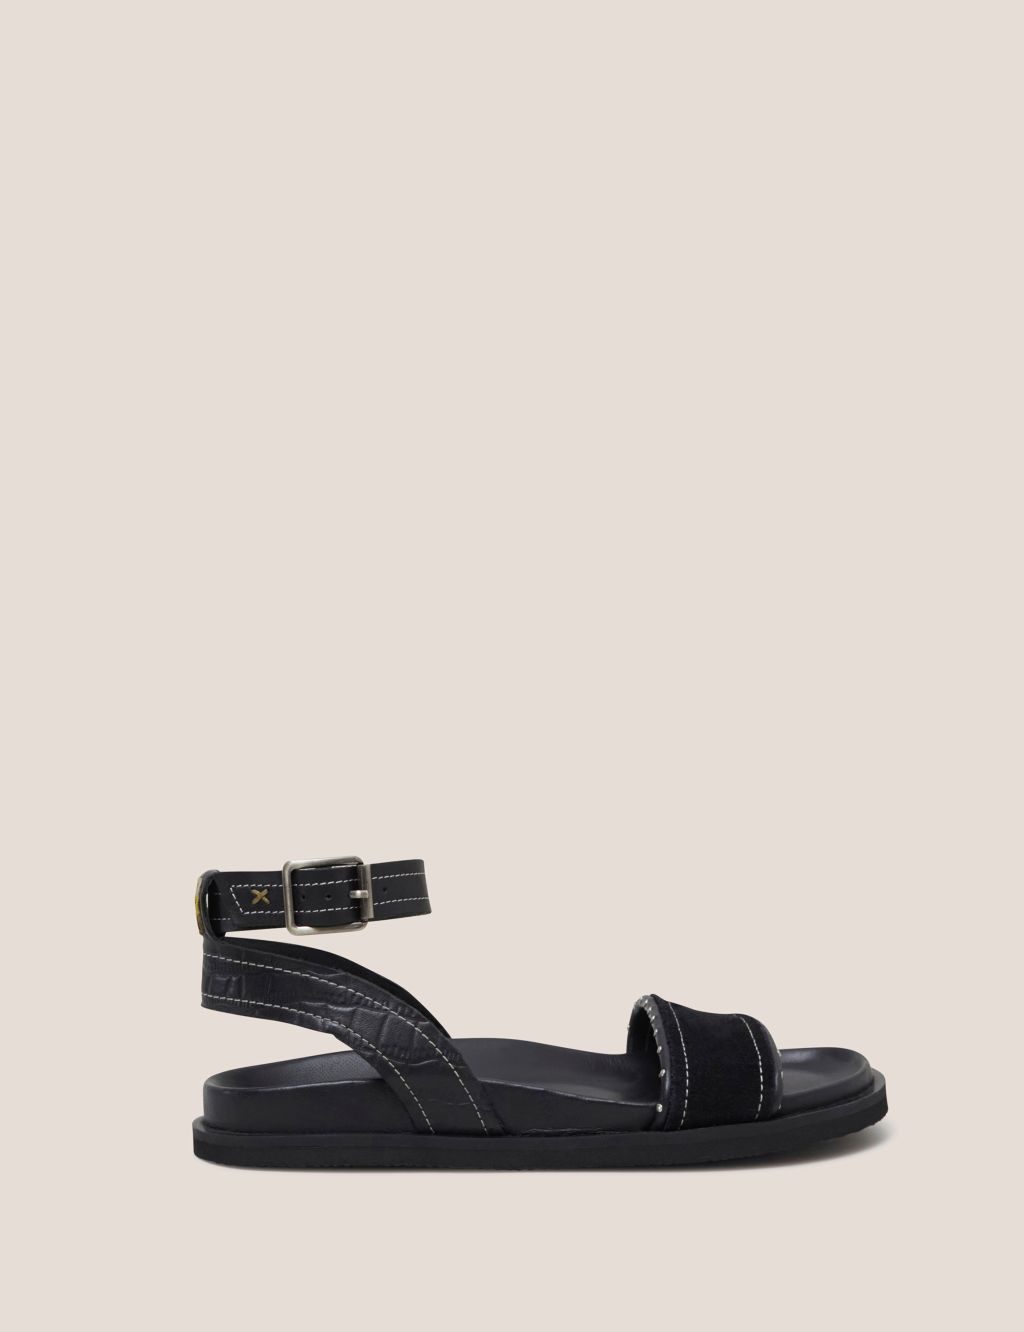 Leather Buckle Ankle Strap Flat Sandals image 1